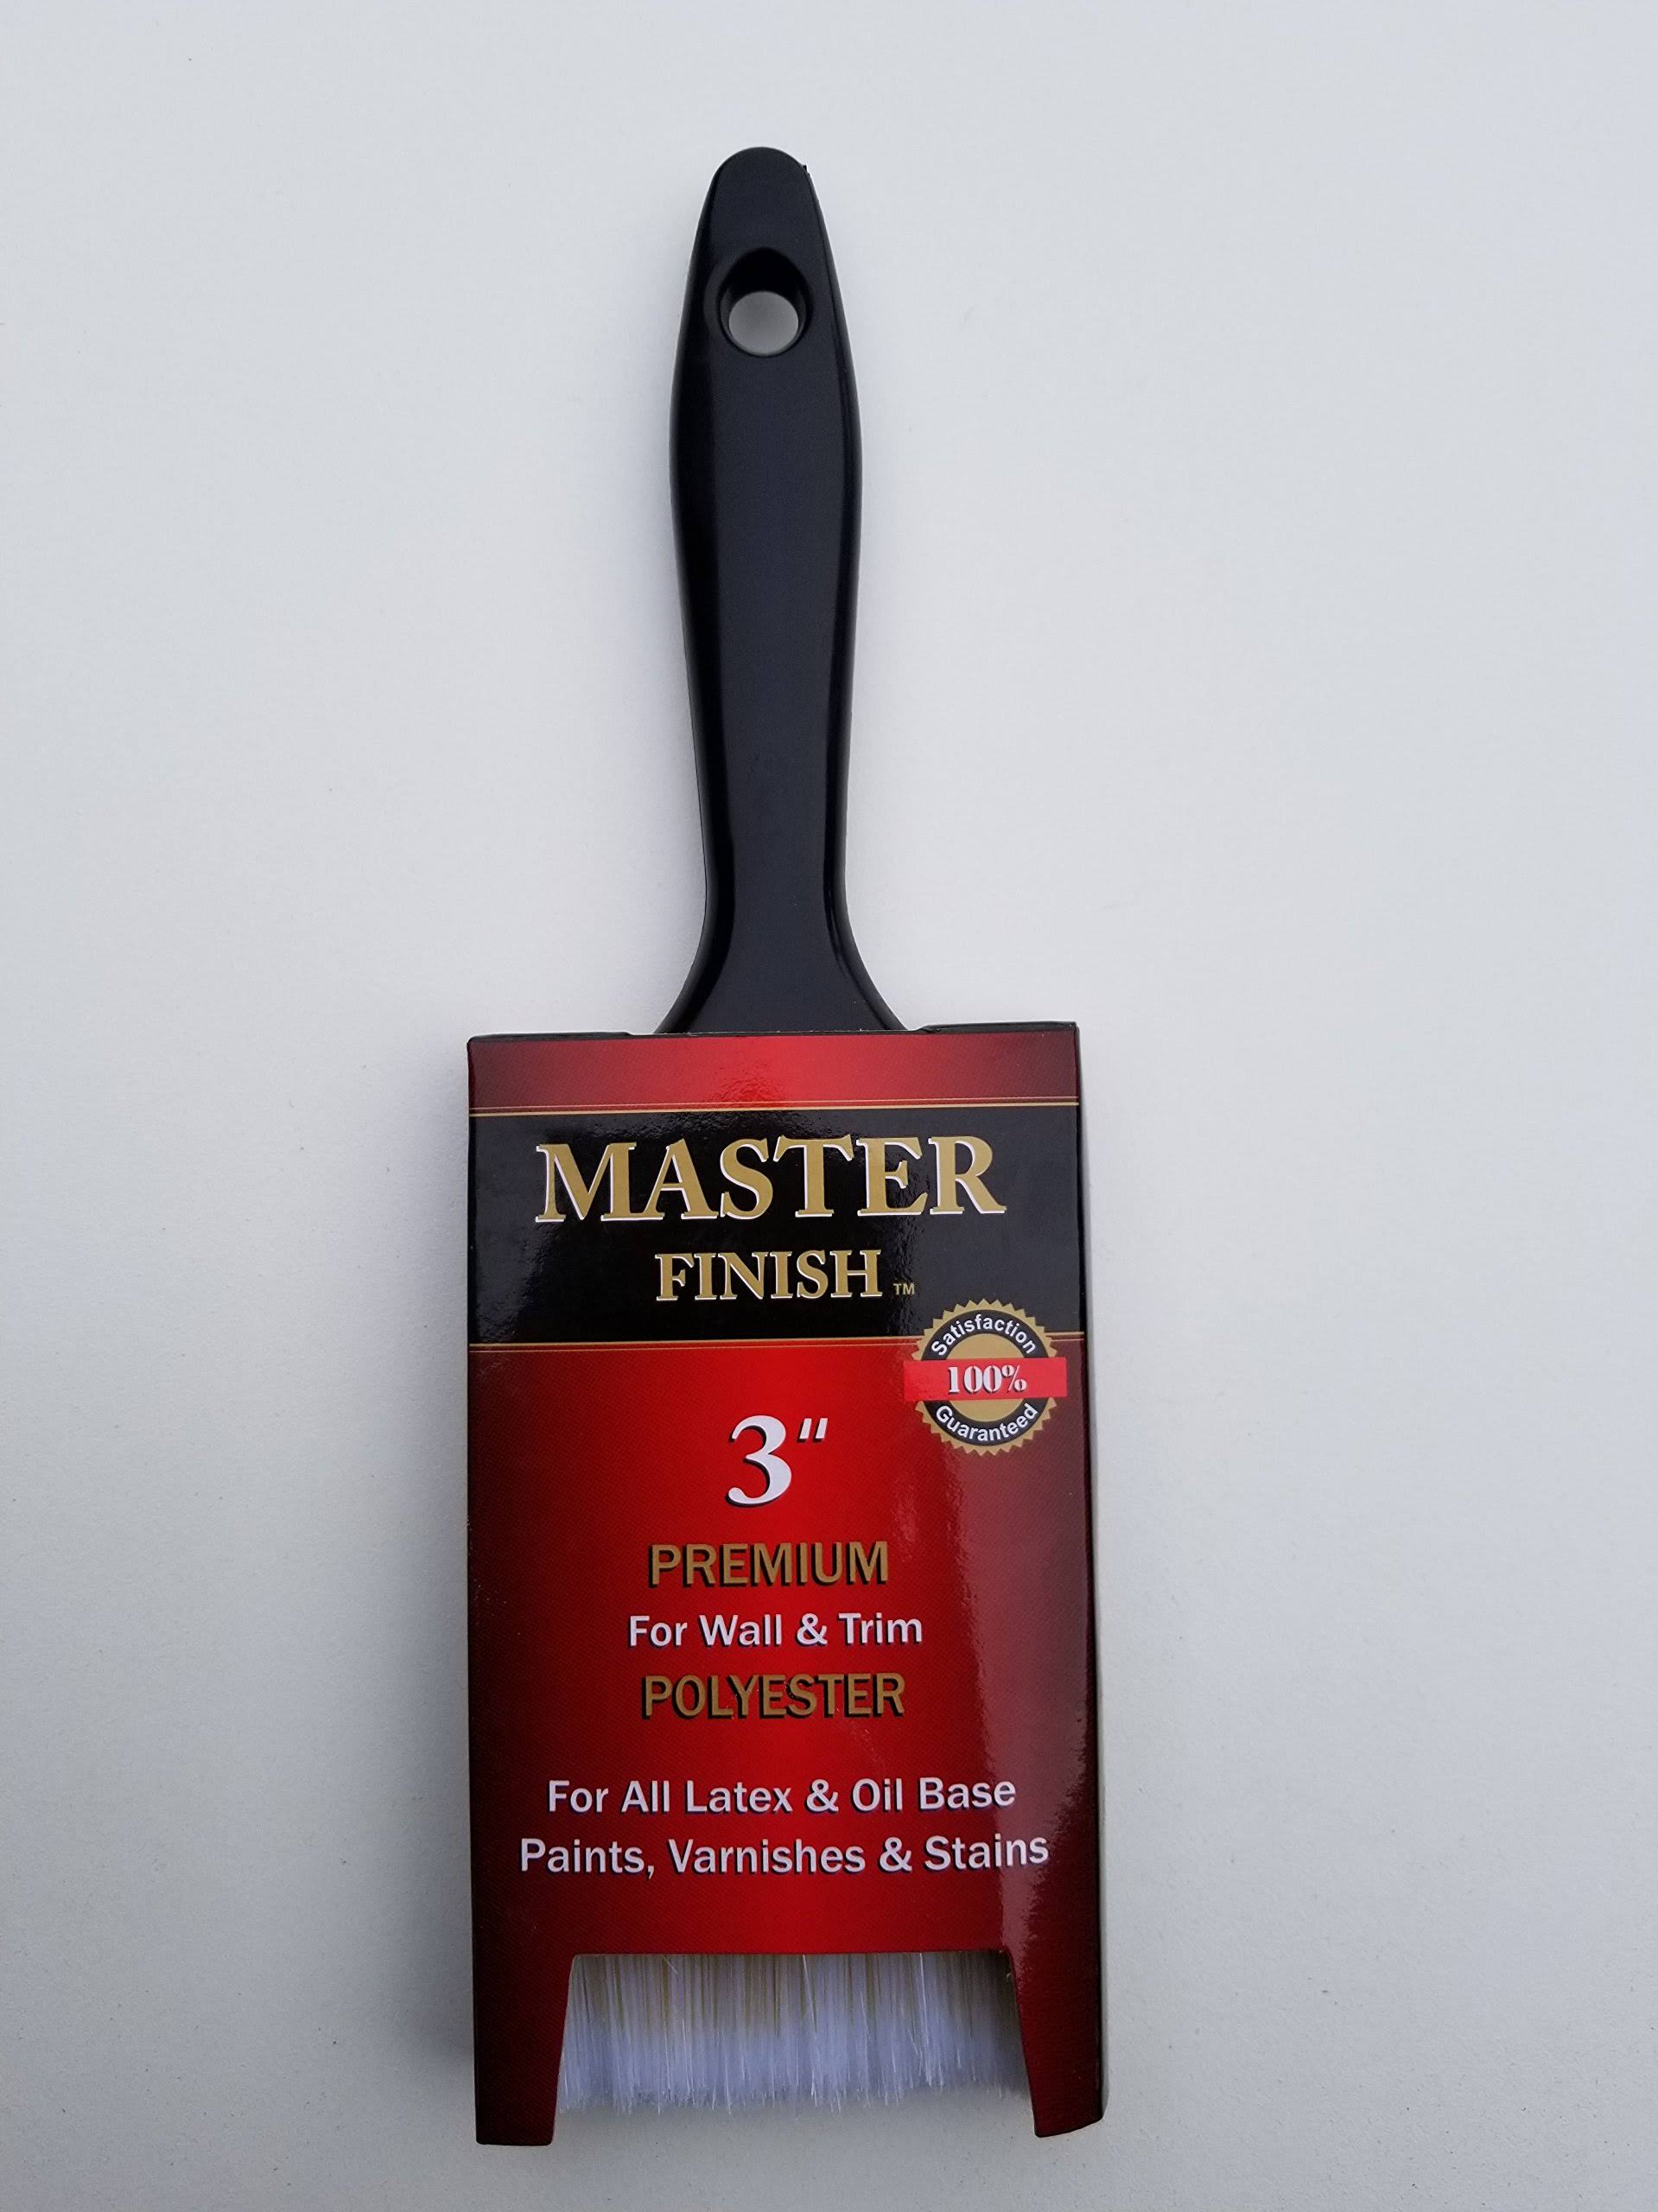 Master Finish 3" Premium Polyester Paint Brush for House Wall & Siding Latex & Oil Base Paints